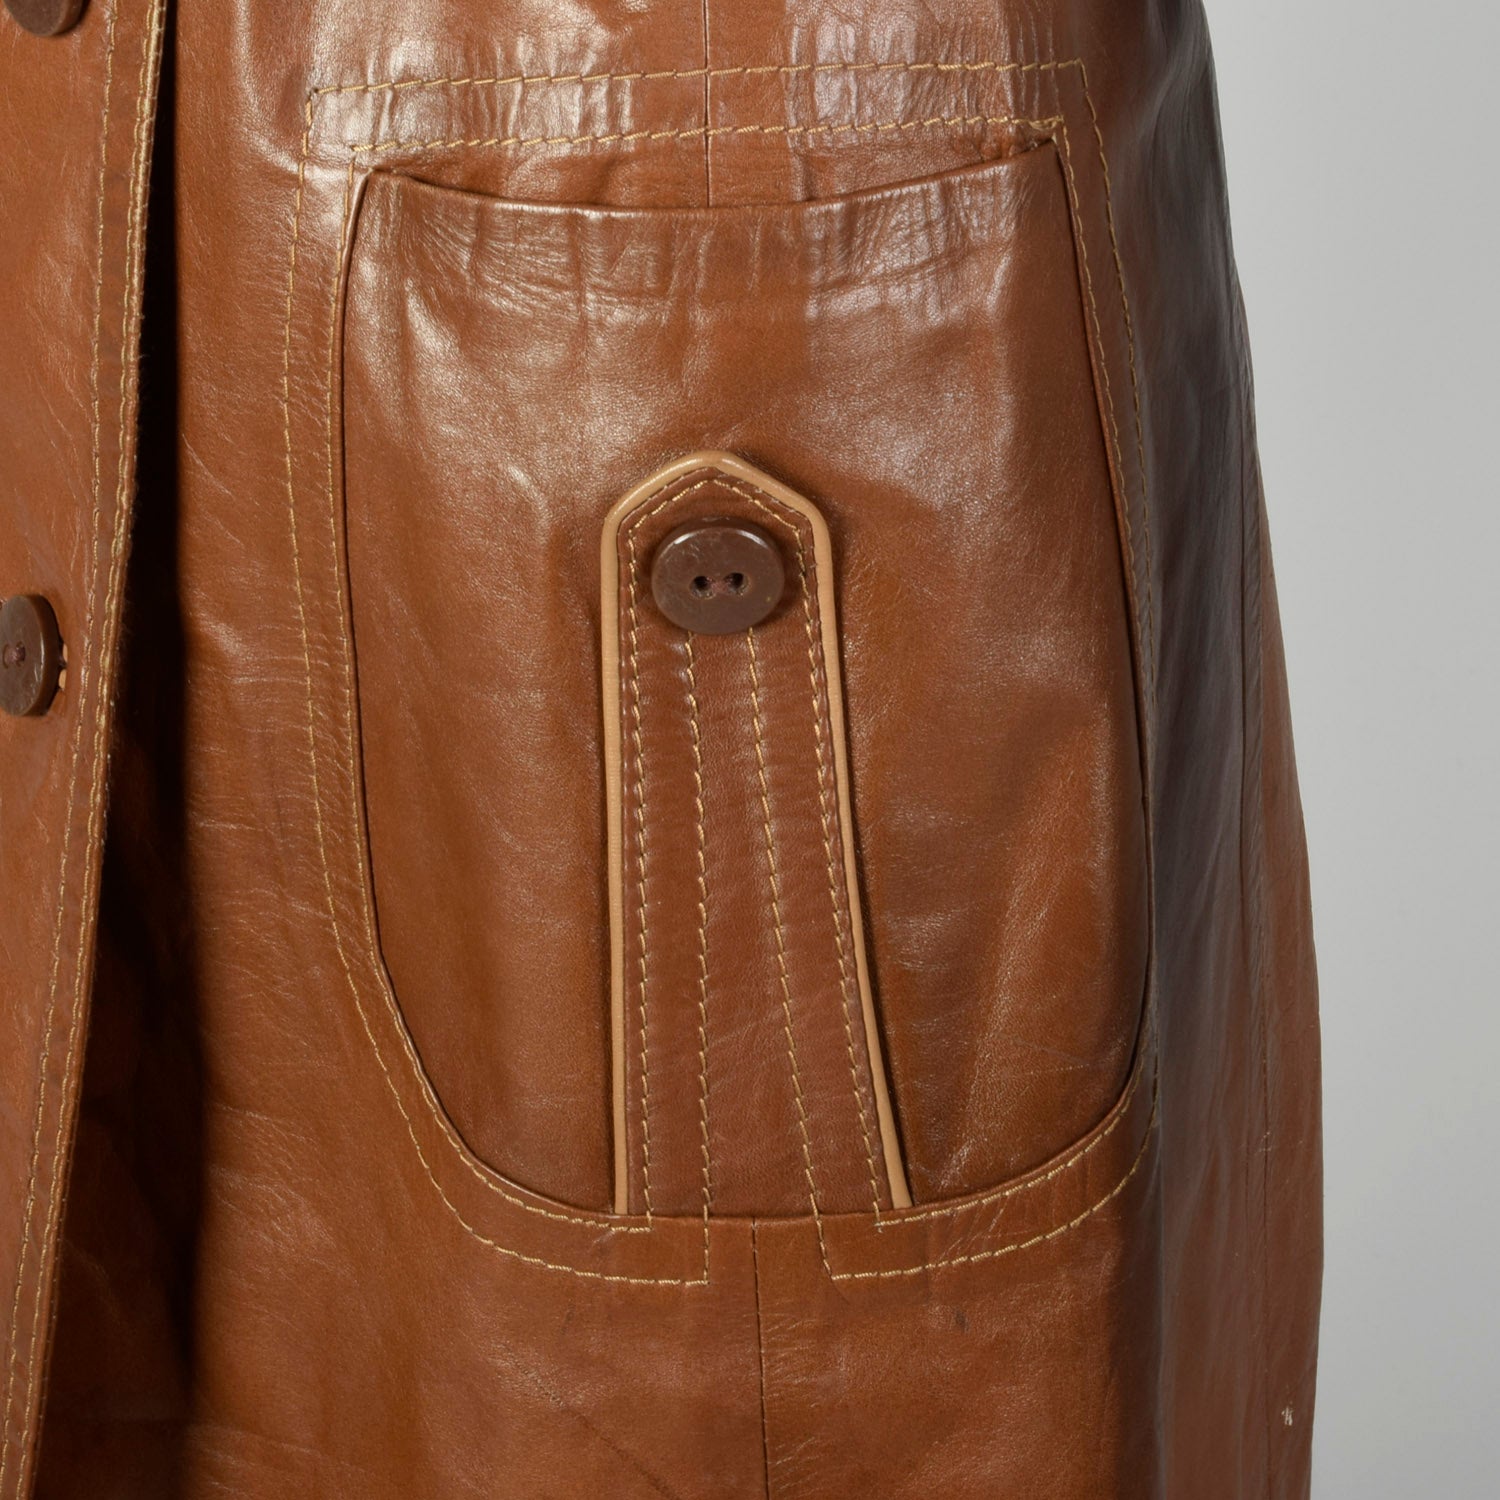 Large 1970s Brown Leather Trench Coat Wide Collar with Great Details